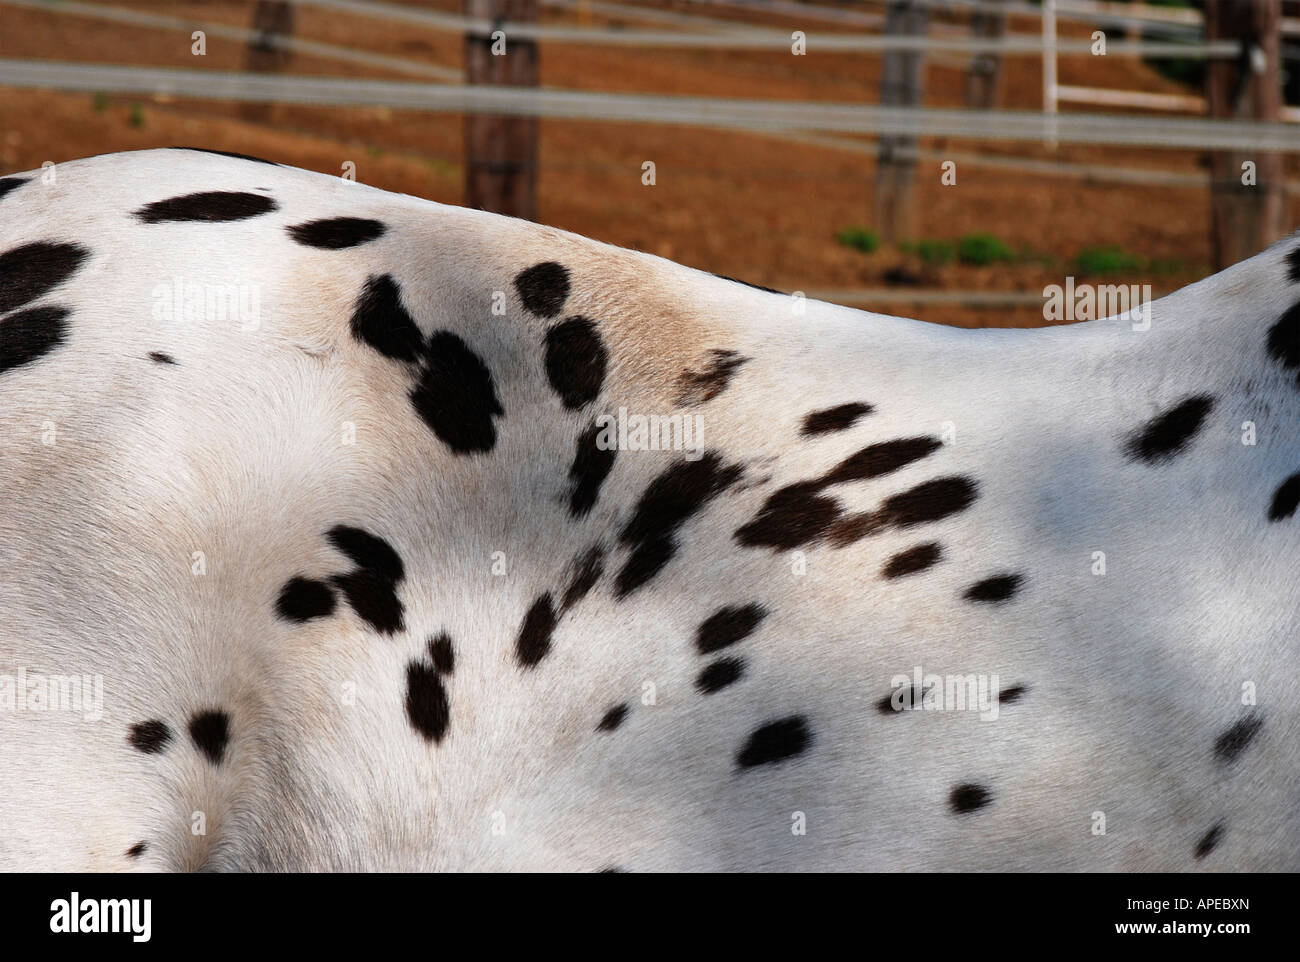 horse flecked with spots Stock Photo